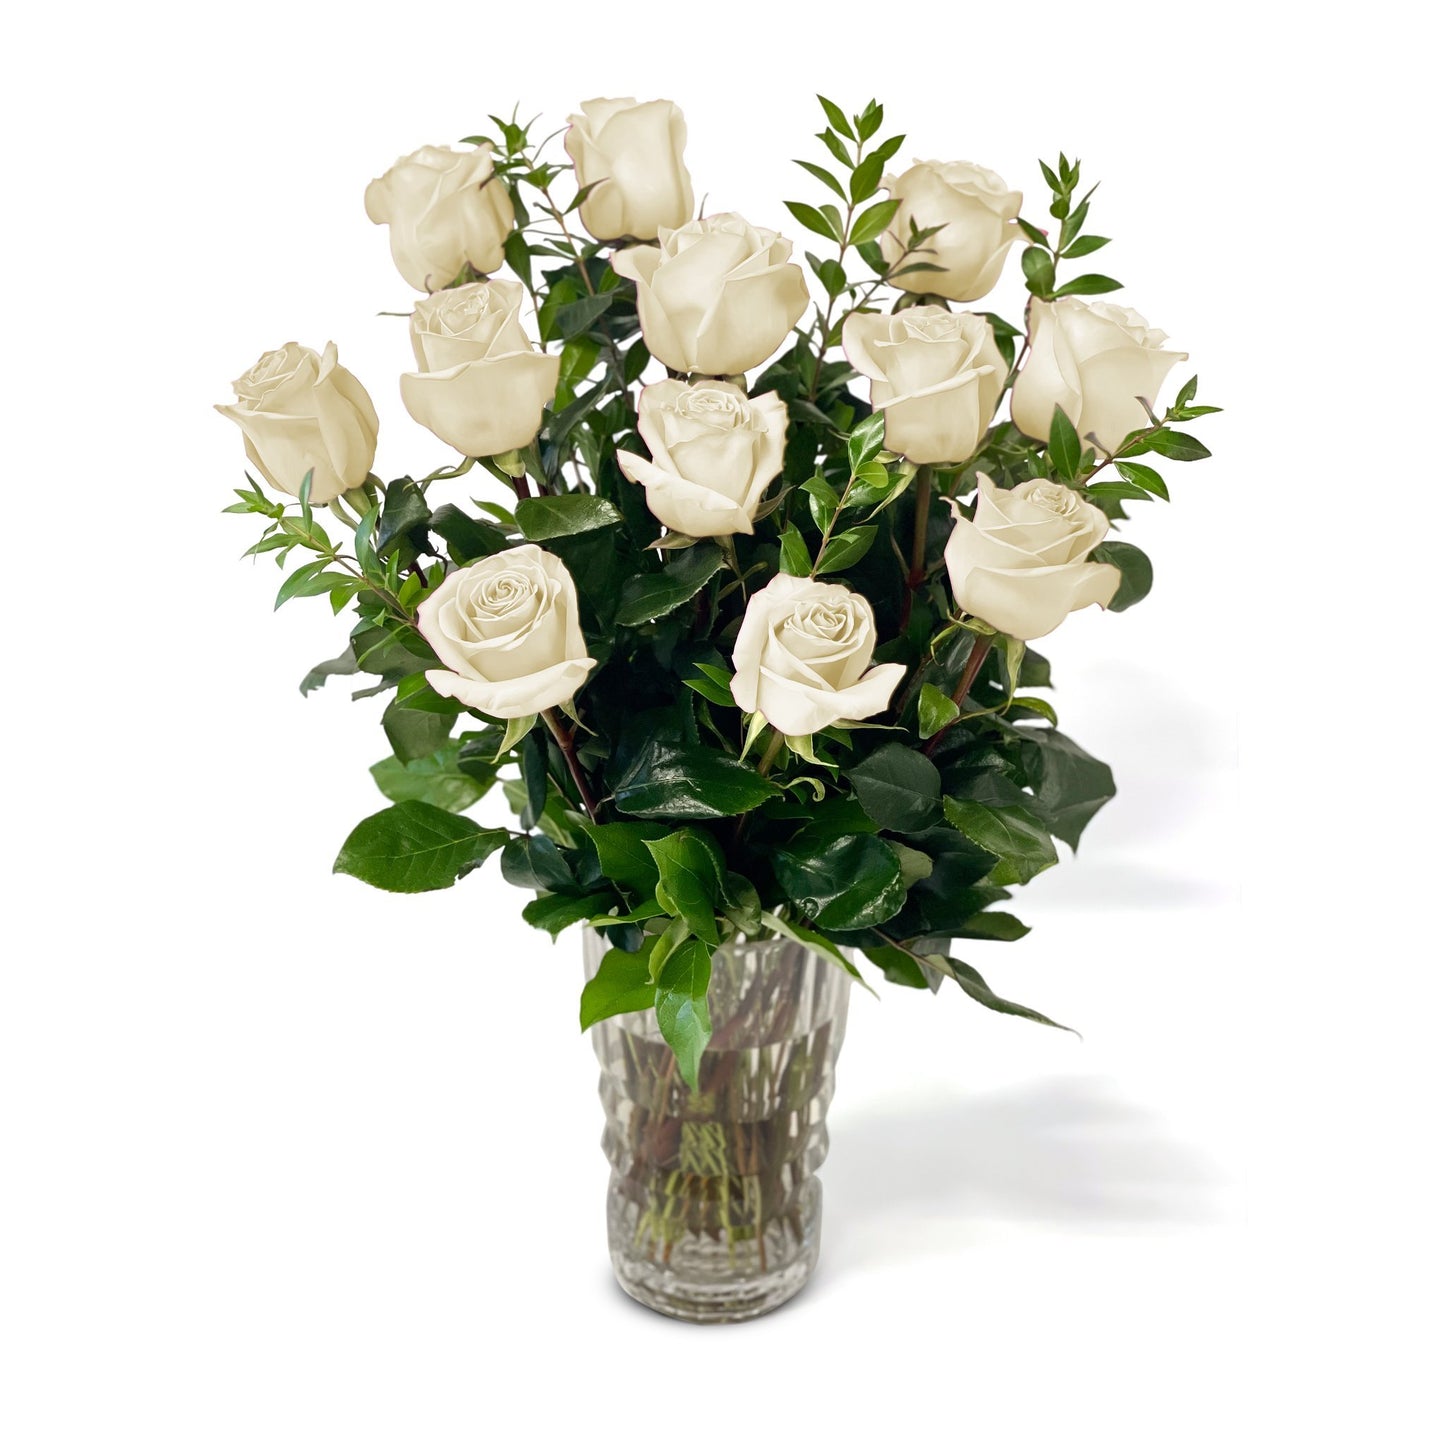 NYC Flower Delivery - Fresh Roses in a Crystal Vase | Dozen White - Roses